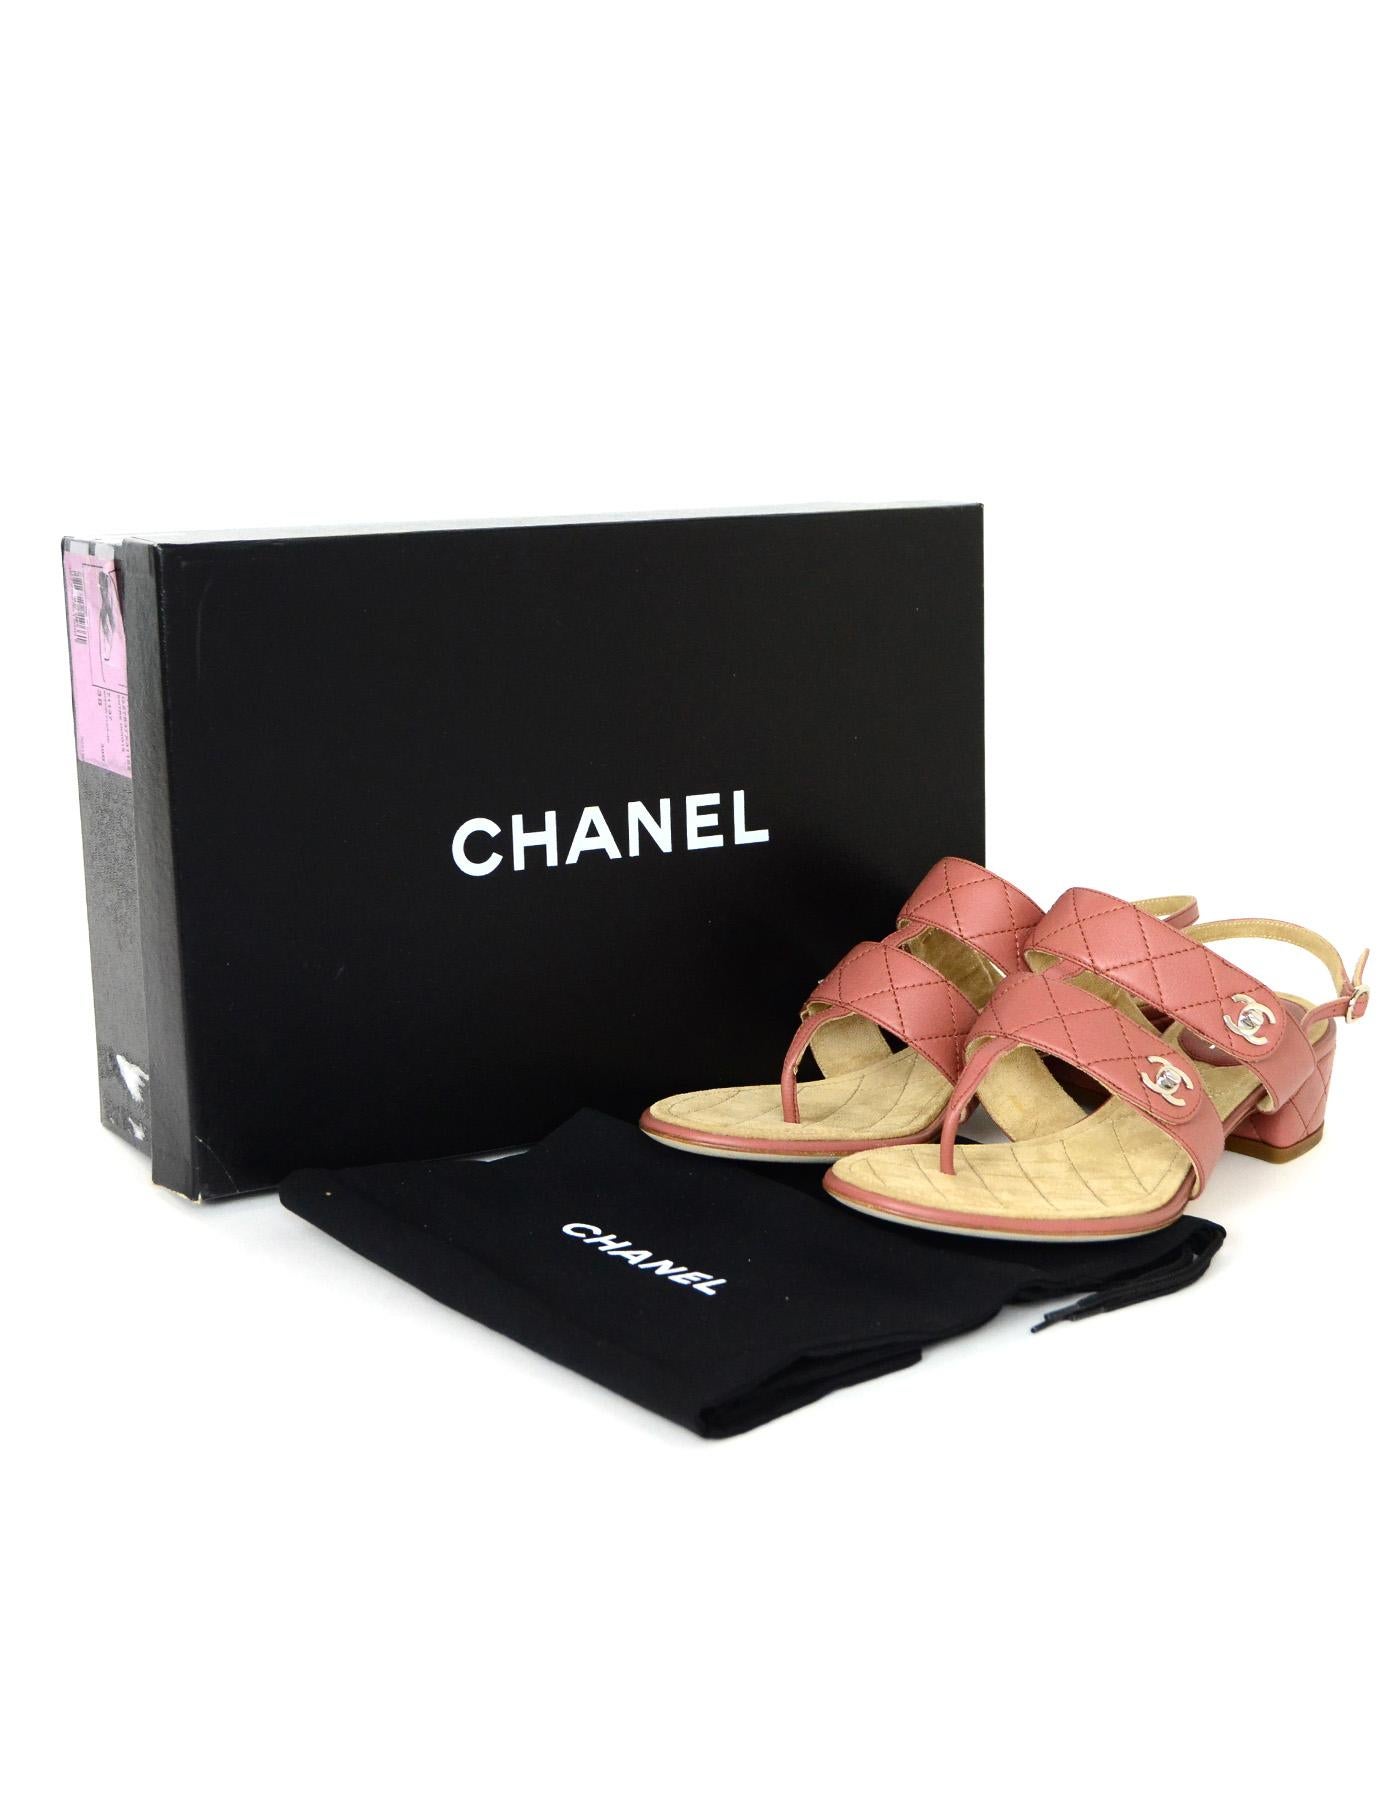 Chanel Dark Blush Calfskin Leather Quilted CC Turnlock Thong Heeled Sandals Sz 38 New

Made In: Italy
Year of Production: 2011
Color: Dark blush
Hardware: Silvertone
Materials: Calfskin leather
Closure/Opening: Sling back with adjustable buckle